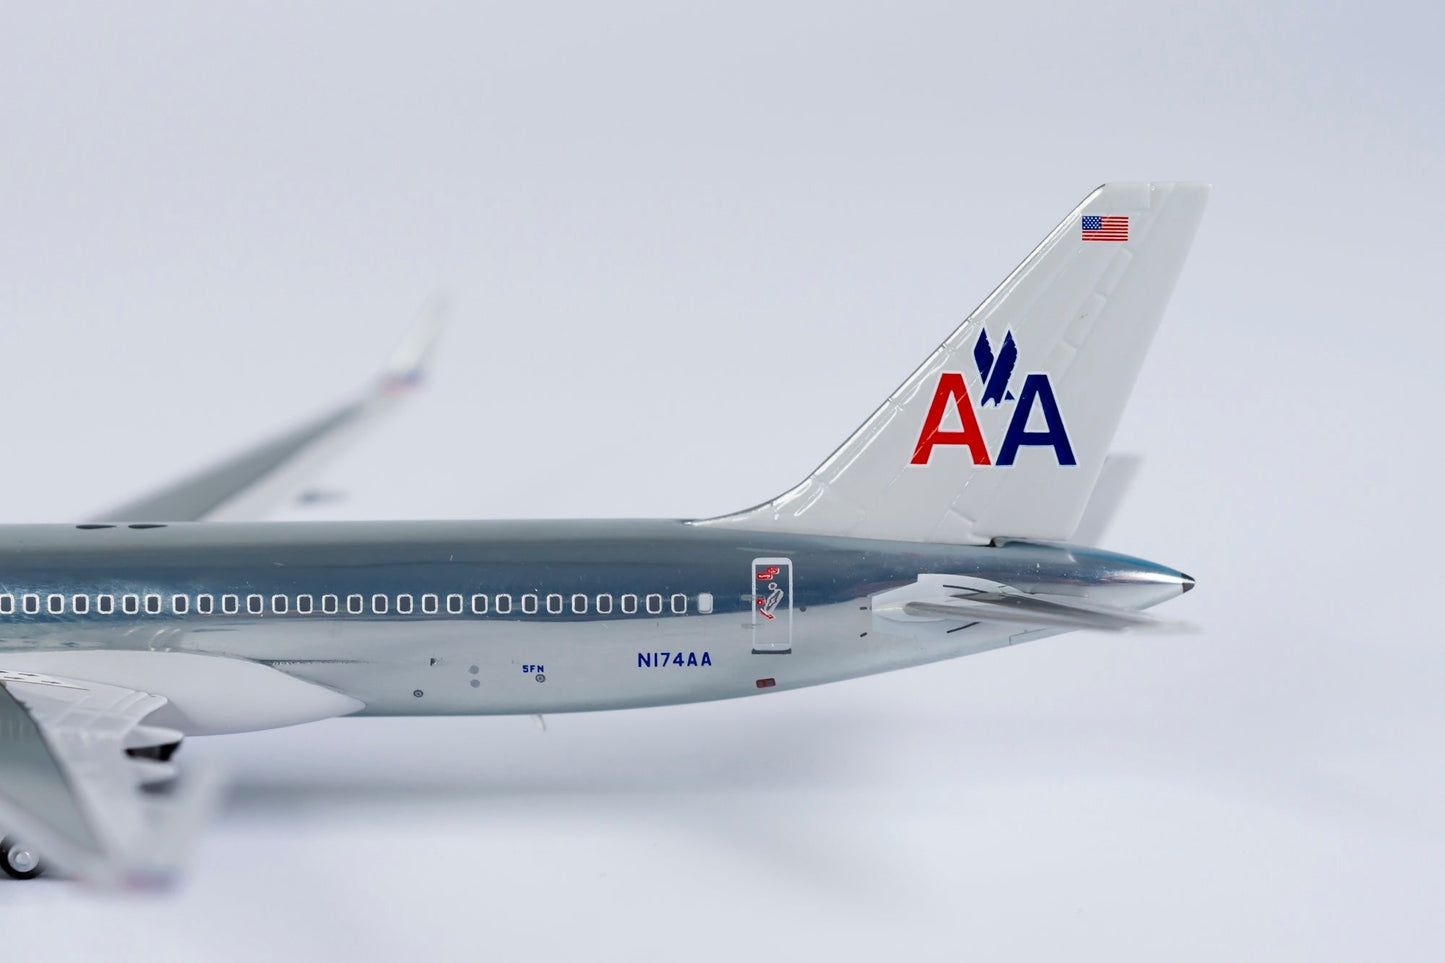 1/400 American Airlines B 757-200/w "OneWorld Livery" NG Models 53178